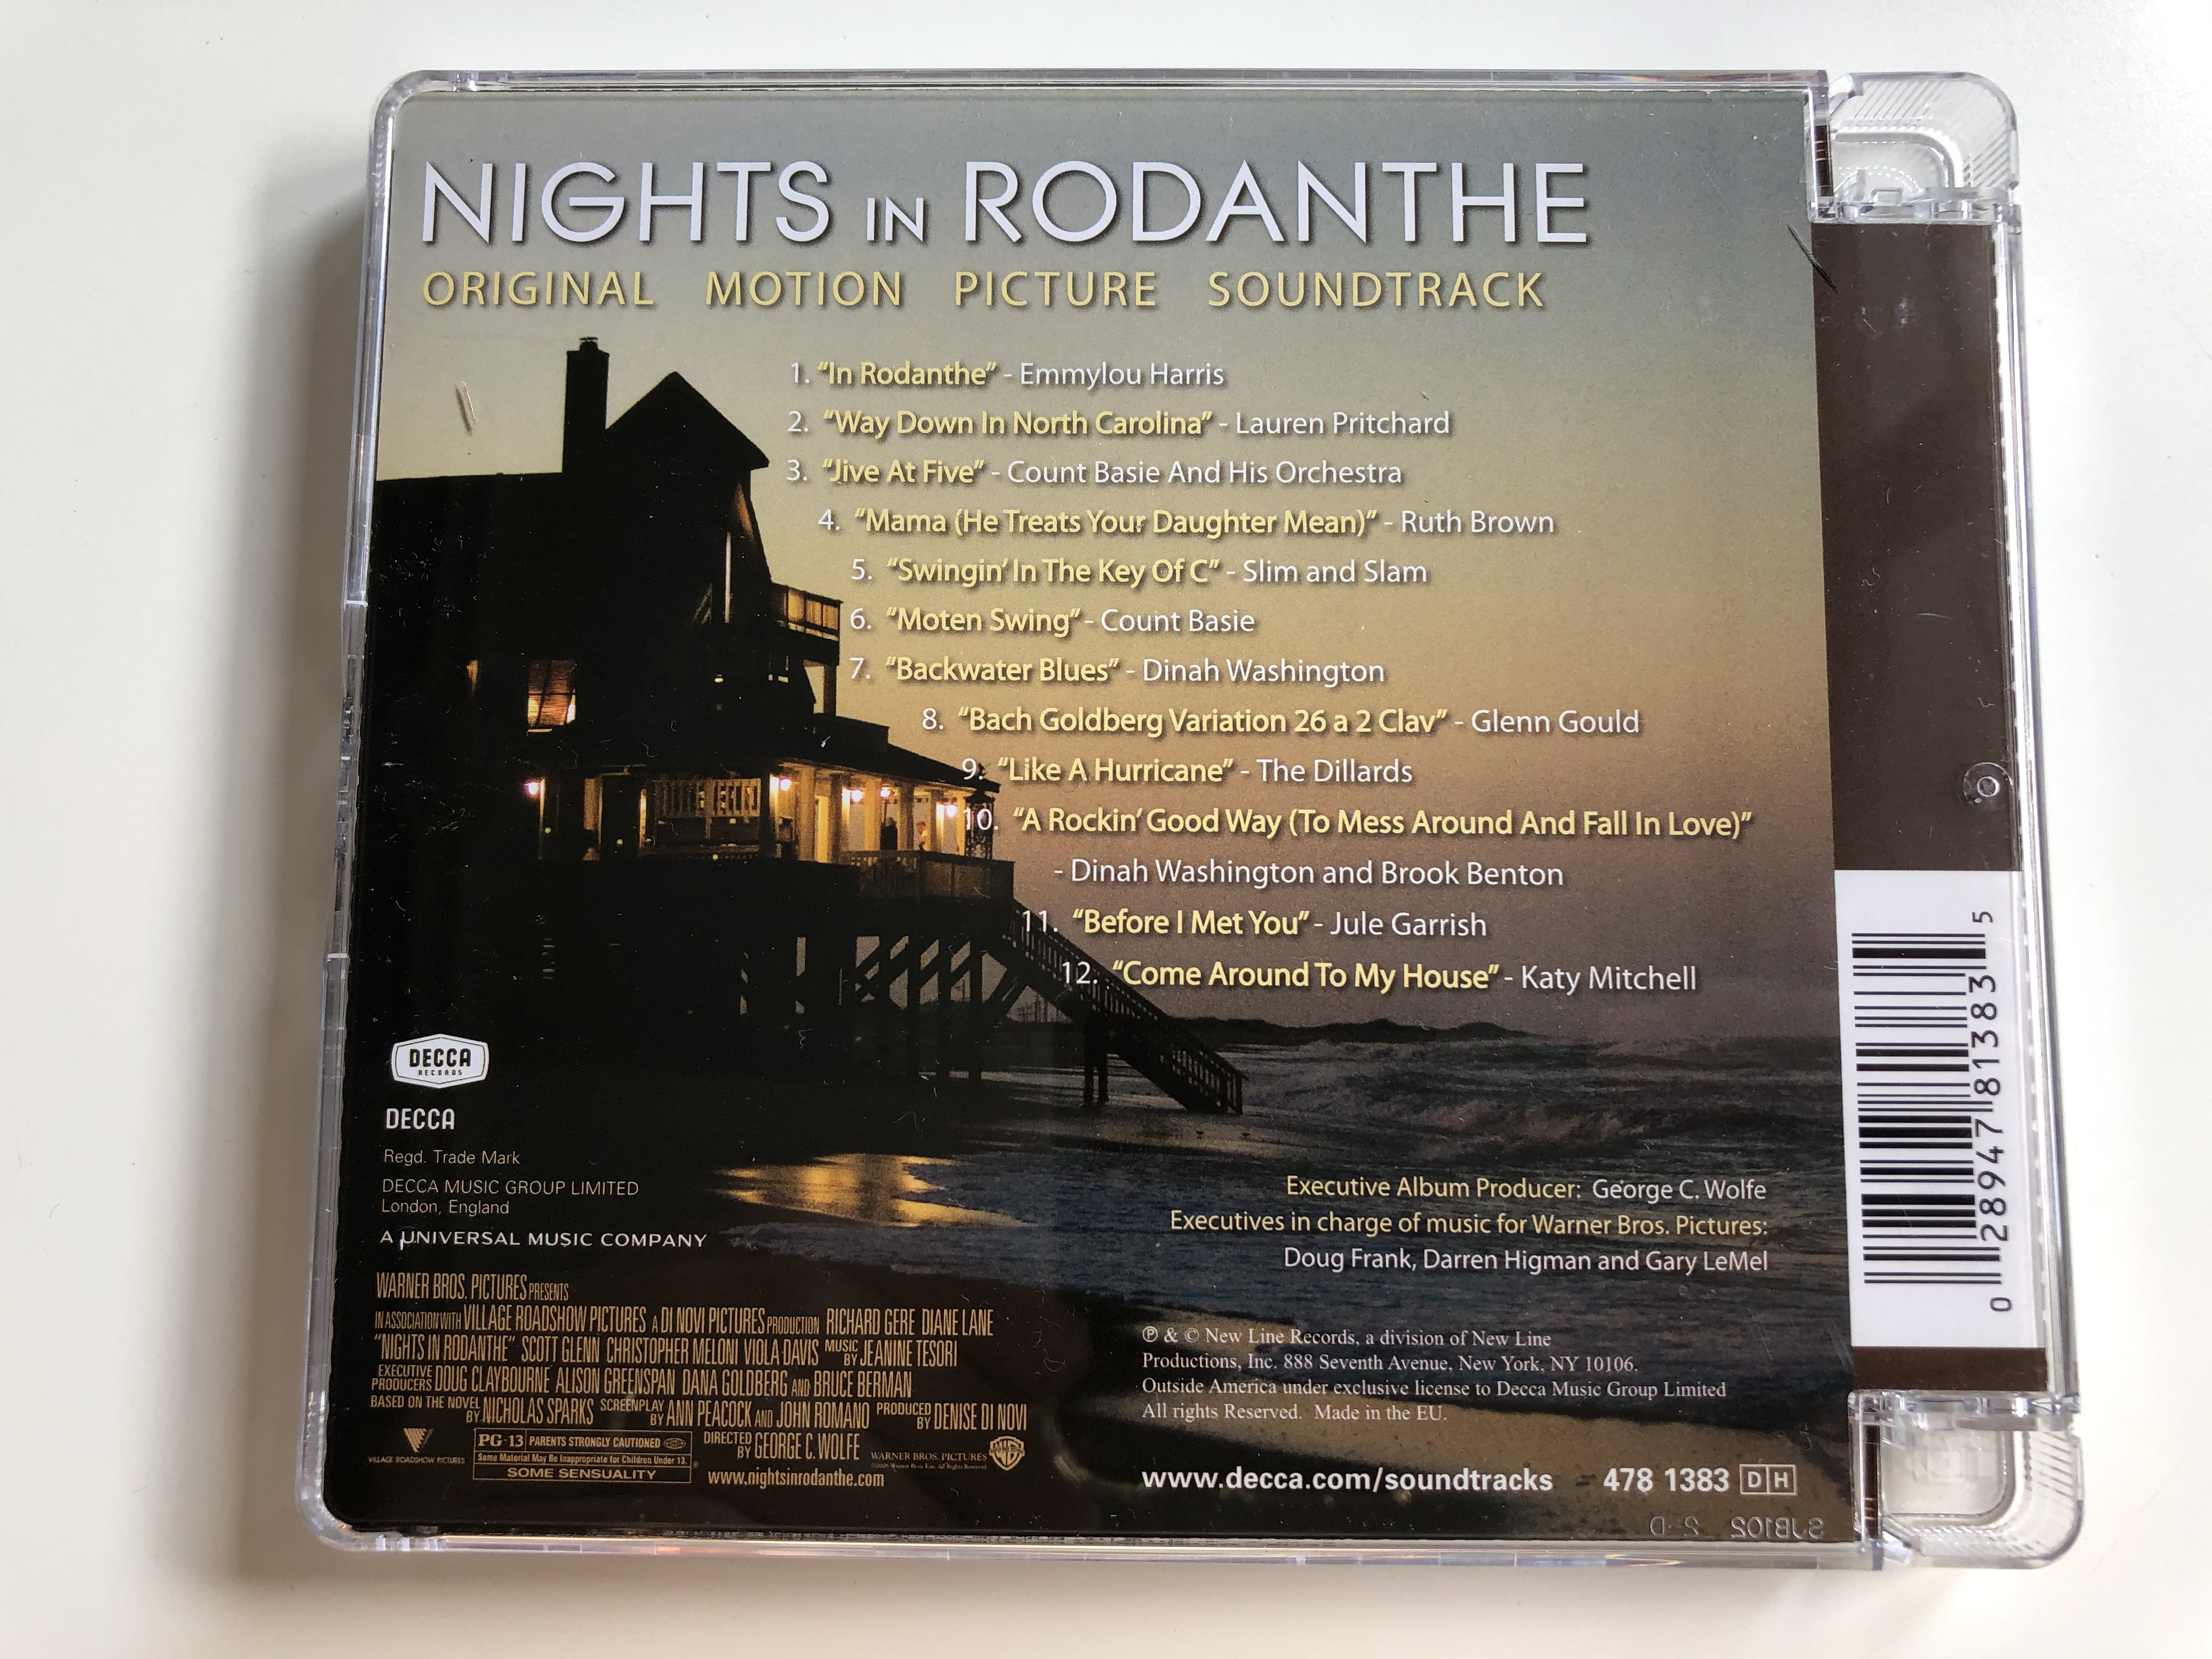 nights-in-rodanthe-original-motion-picture-soundtrack-based-on-the-best-selling-novel-from-the-author-of-the-notebook-decca-music-group-limited-audio-cd-2008-478-1383-6-.jpg